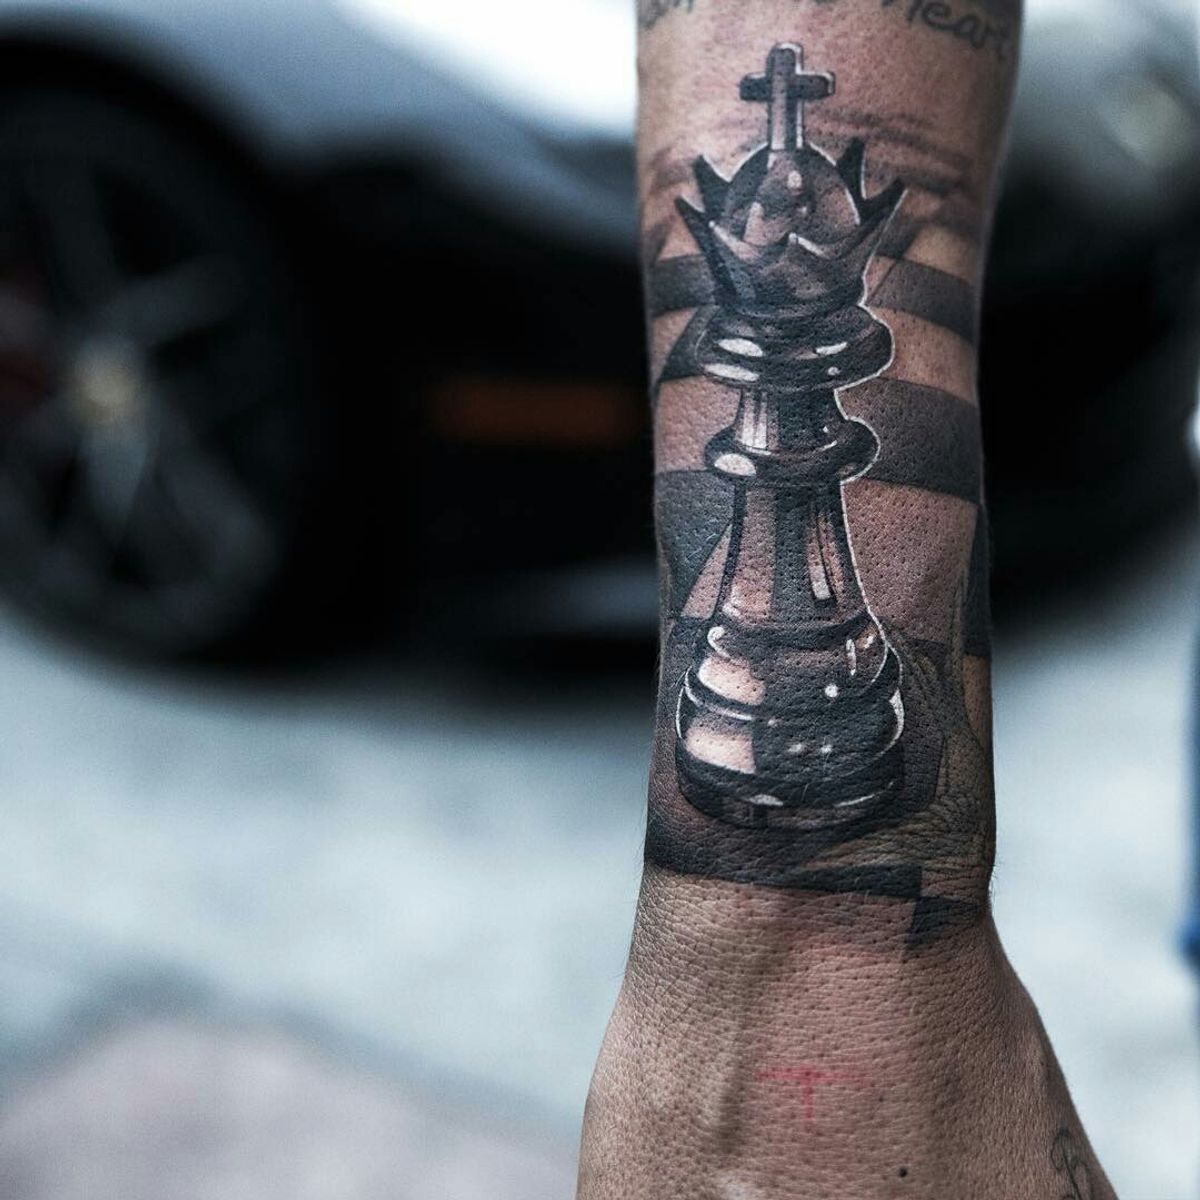 king and queen chess piece tattoo